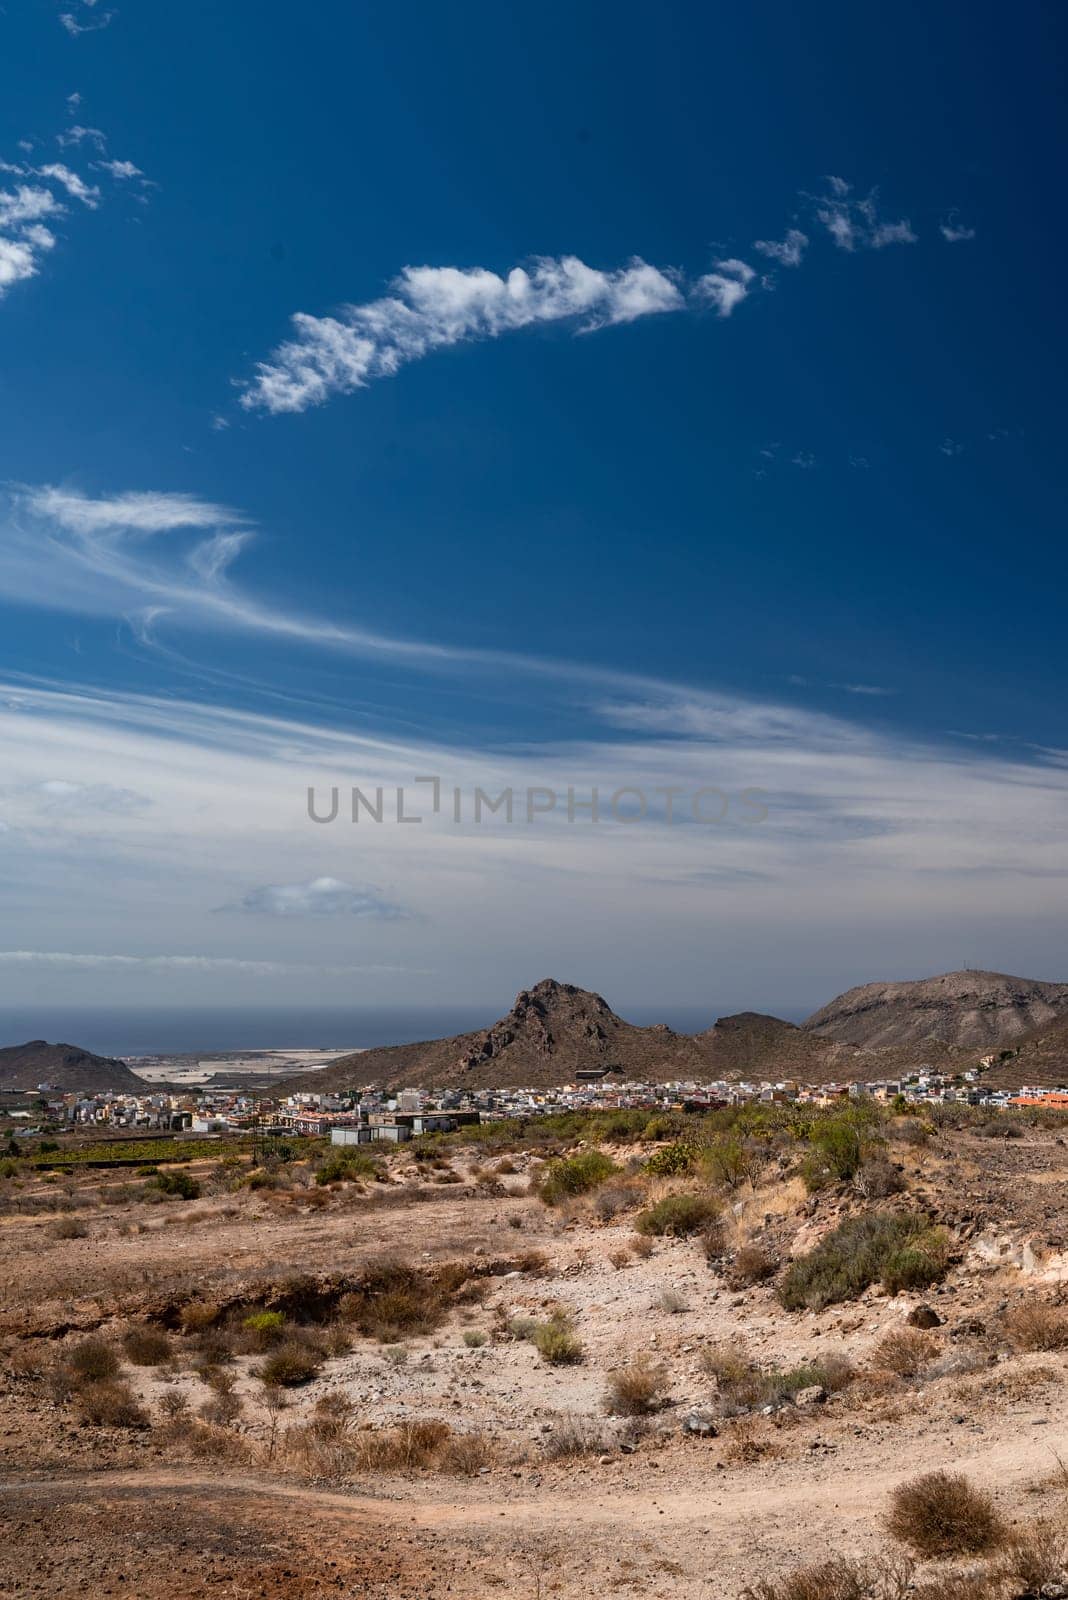 Hiking trail in a desert with a view of a seaside city, sea or ocean on a sunny day. Little mountains or hills at the horizon, blue sky and clouds. Little shrubs and a walking path between